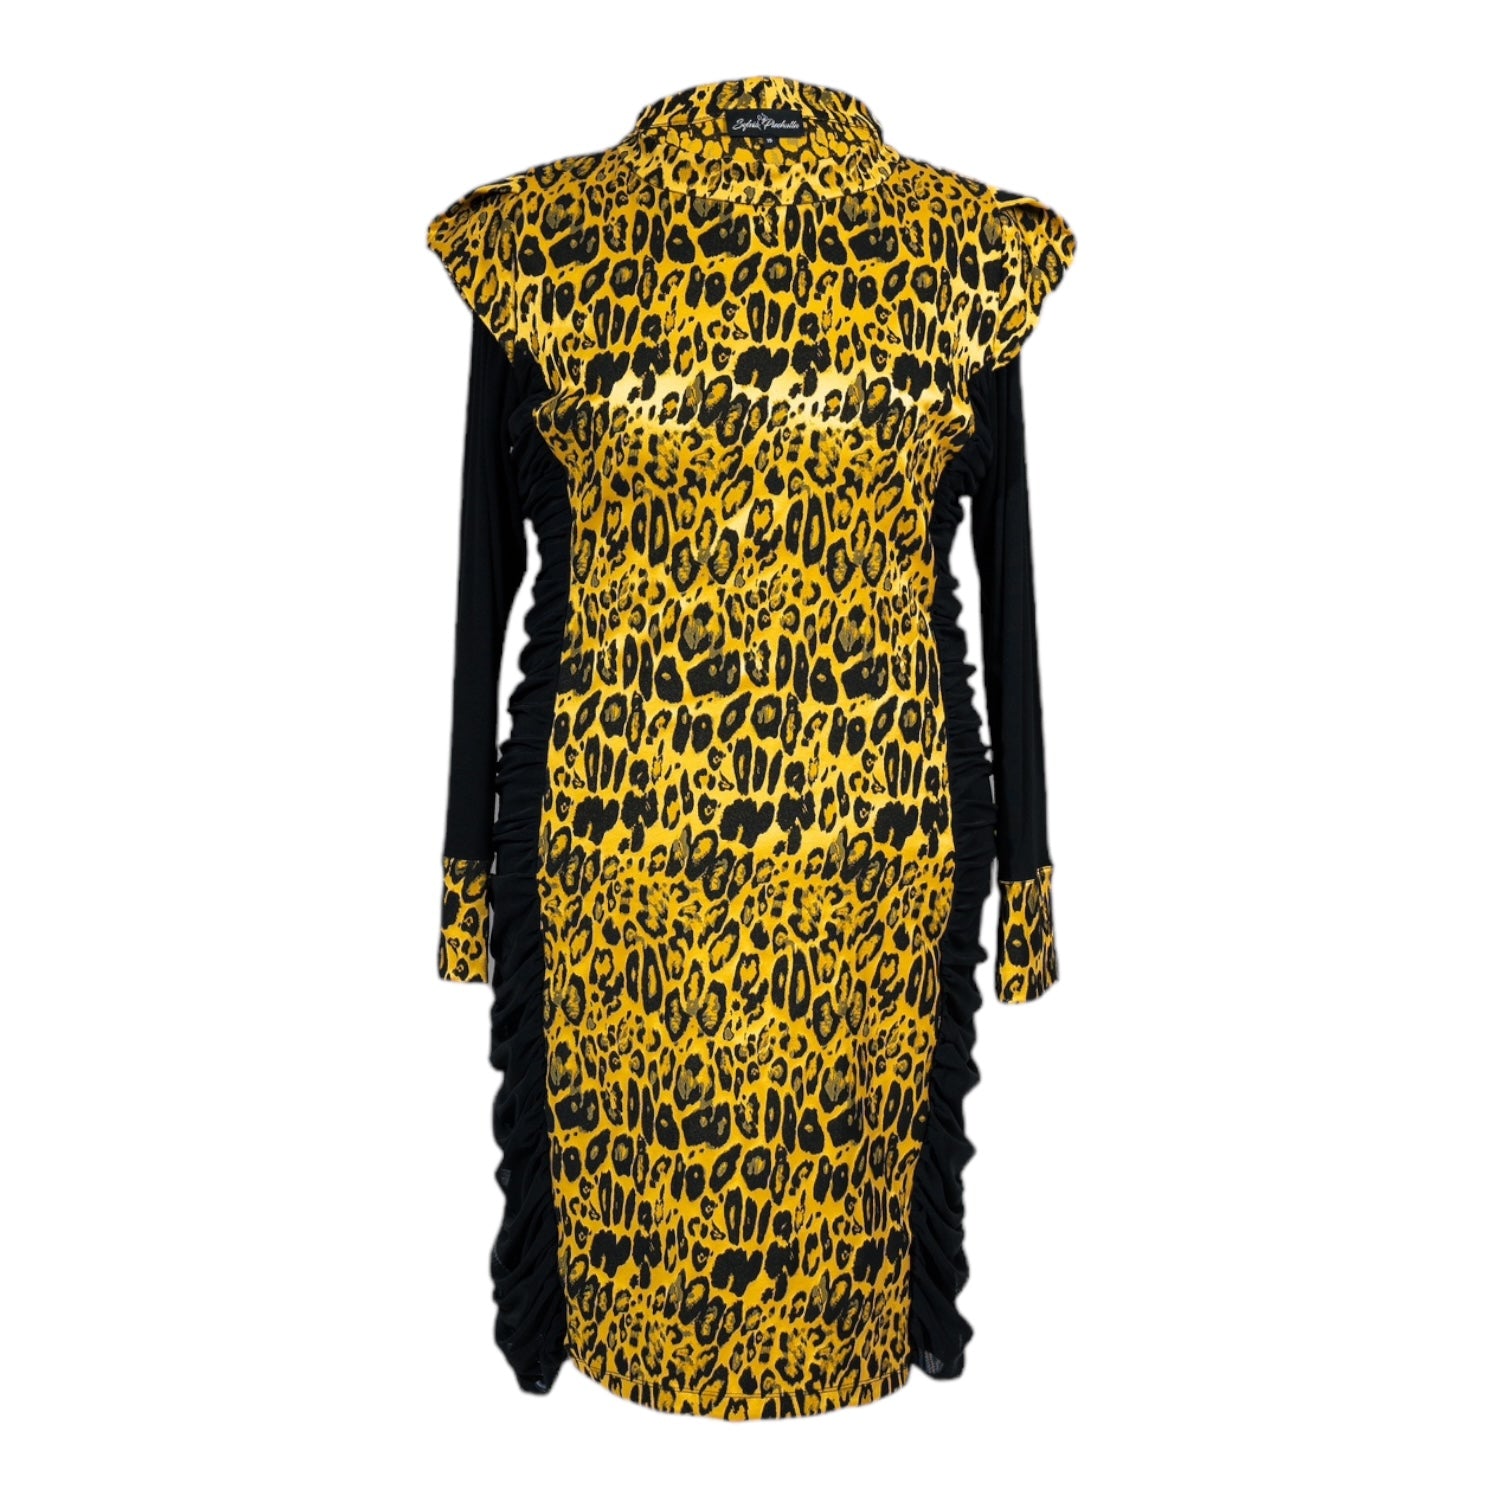 Women's Plus Size and Mid Size Black Gold Bodycon Midi Brocade Jacquard Leopard Dress displayed as a cutout on an invisible mannequin.